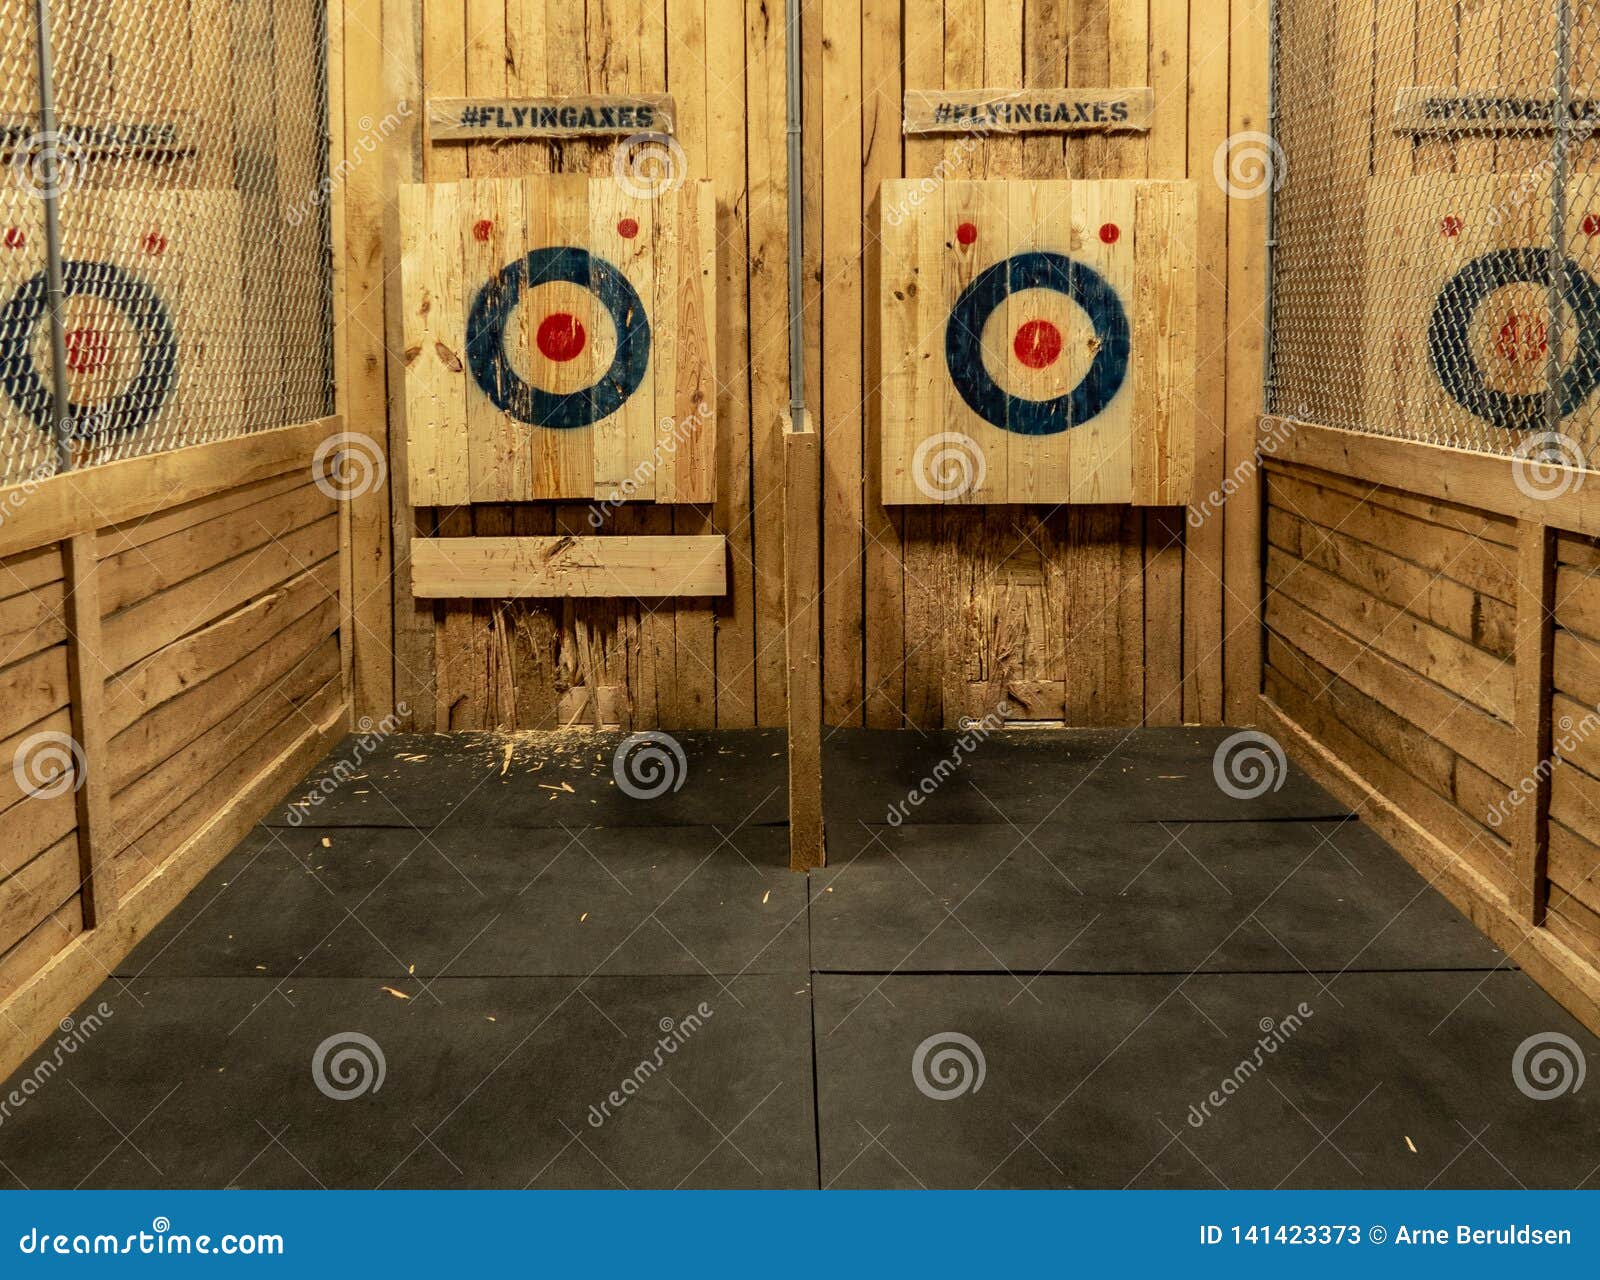 axe throwing targets